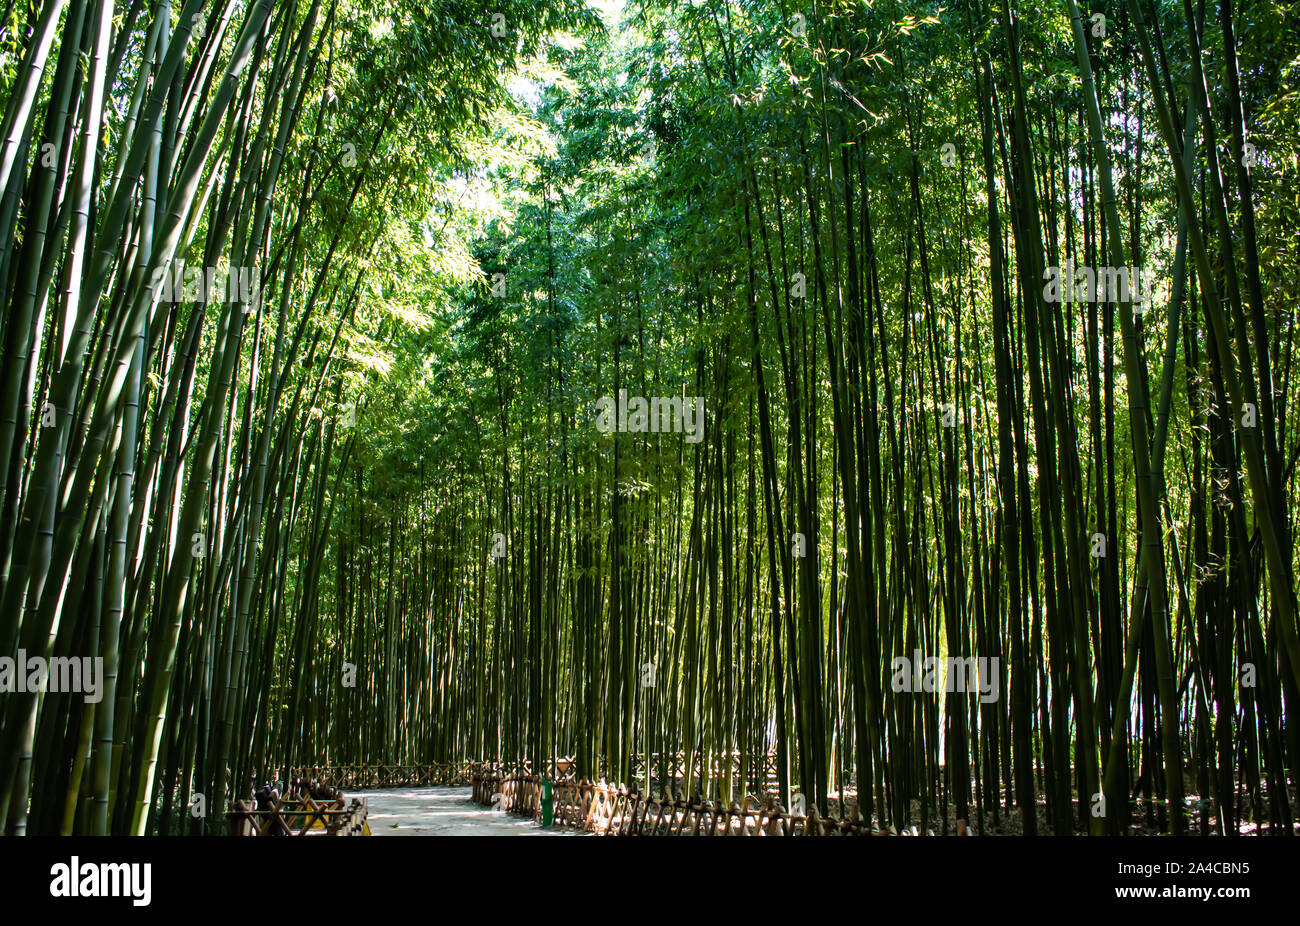 Stunning serene bamboo forest. Take a stroll through this peaceful and magnificent green space, as the bamboo towers above you. Stock Photo